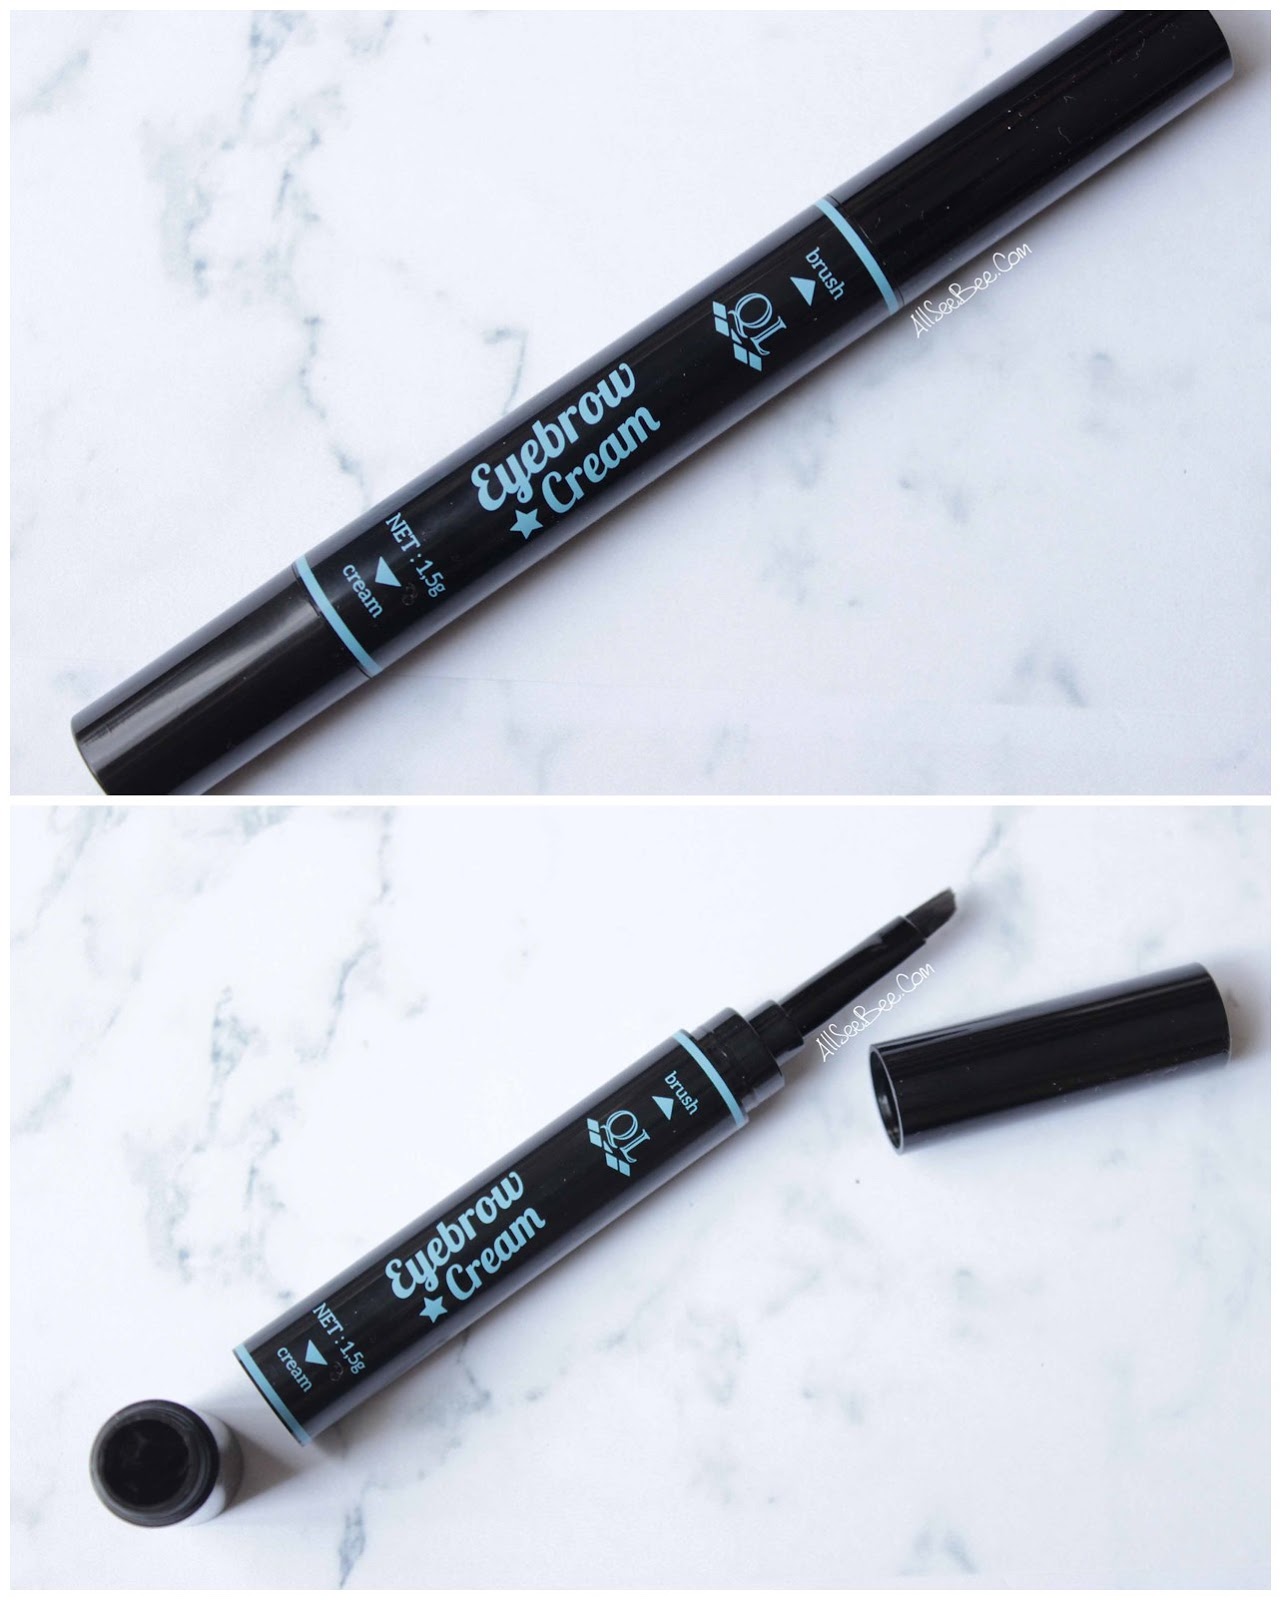 REVIEW+FIRST IMPRESSION Eyebrow cream and Mascara by QL 